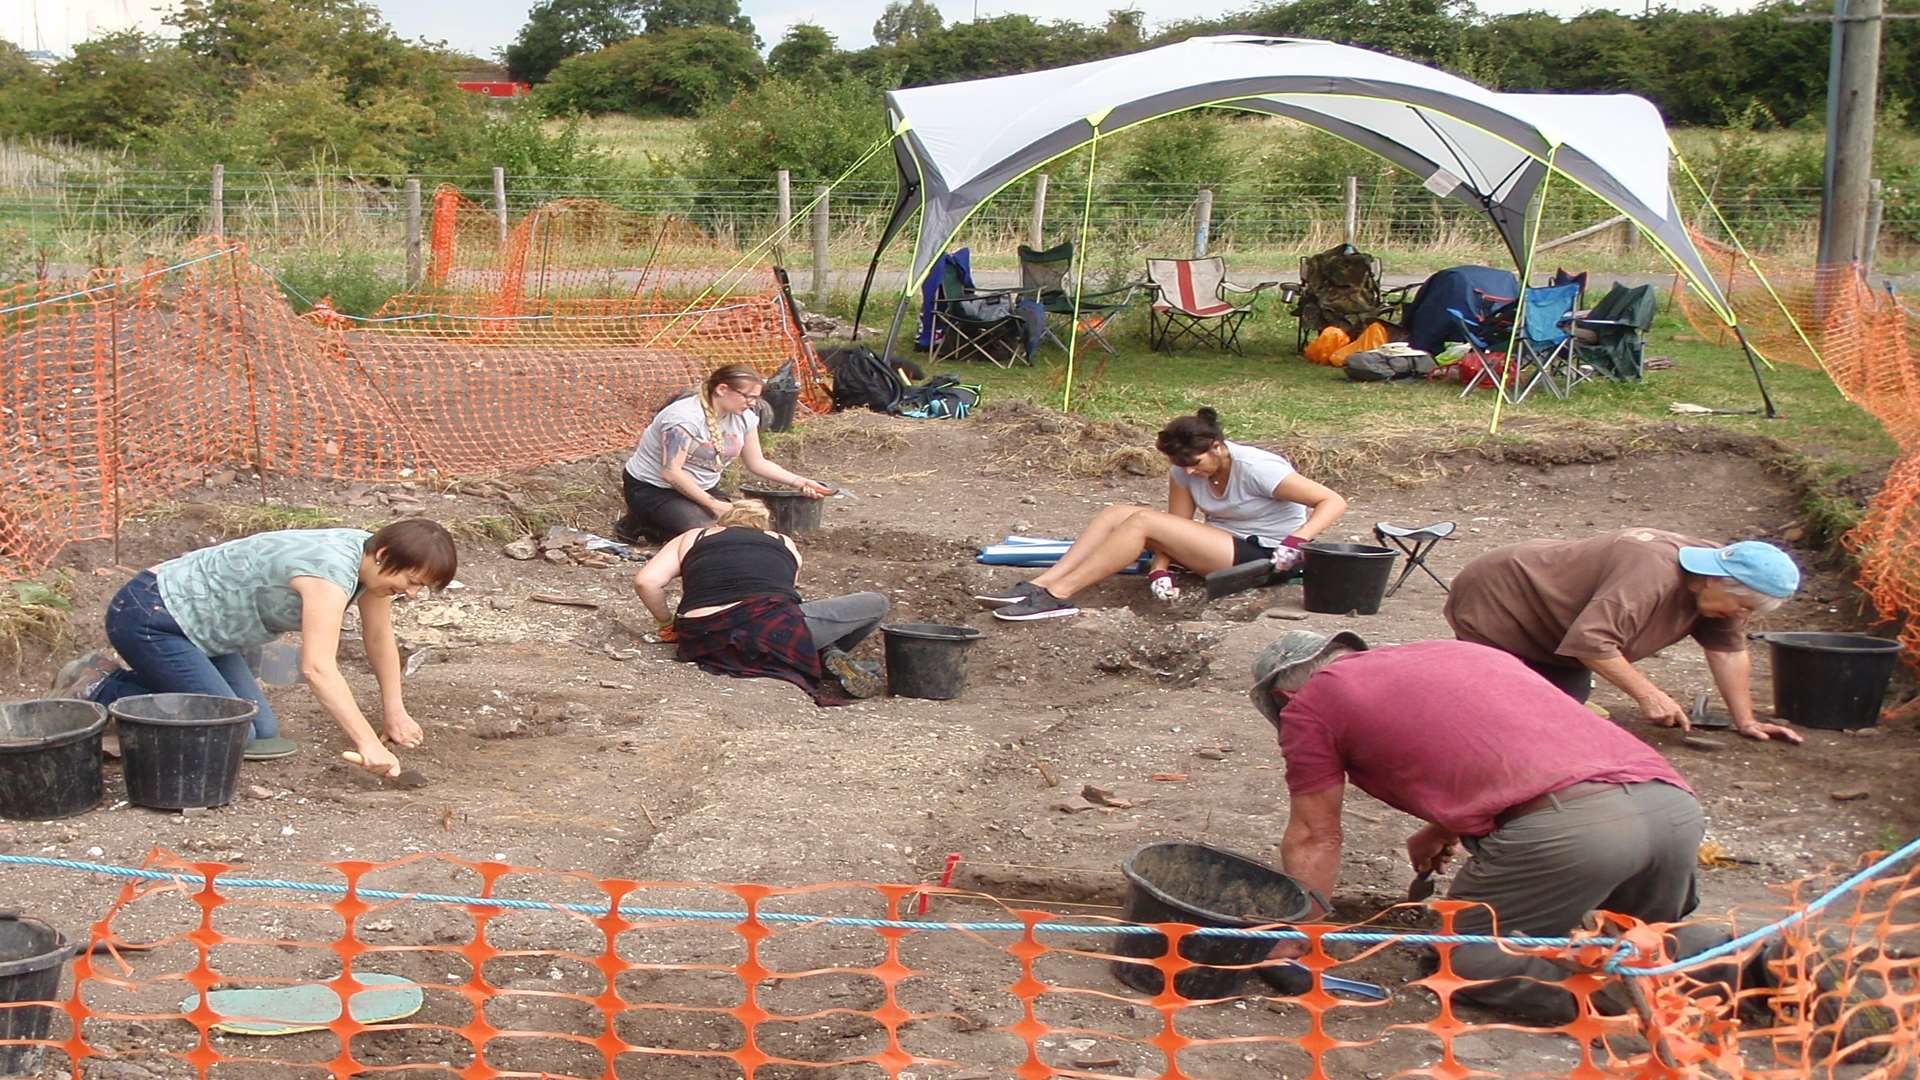 Ongoing excavation have uncovered evidence of an emporium serving the port at Faversham.